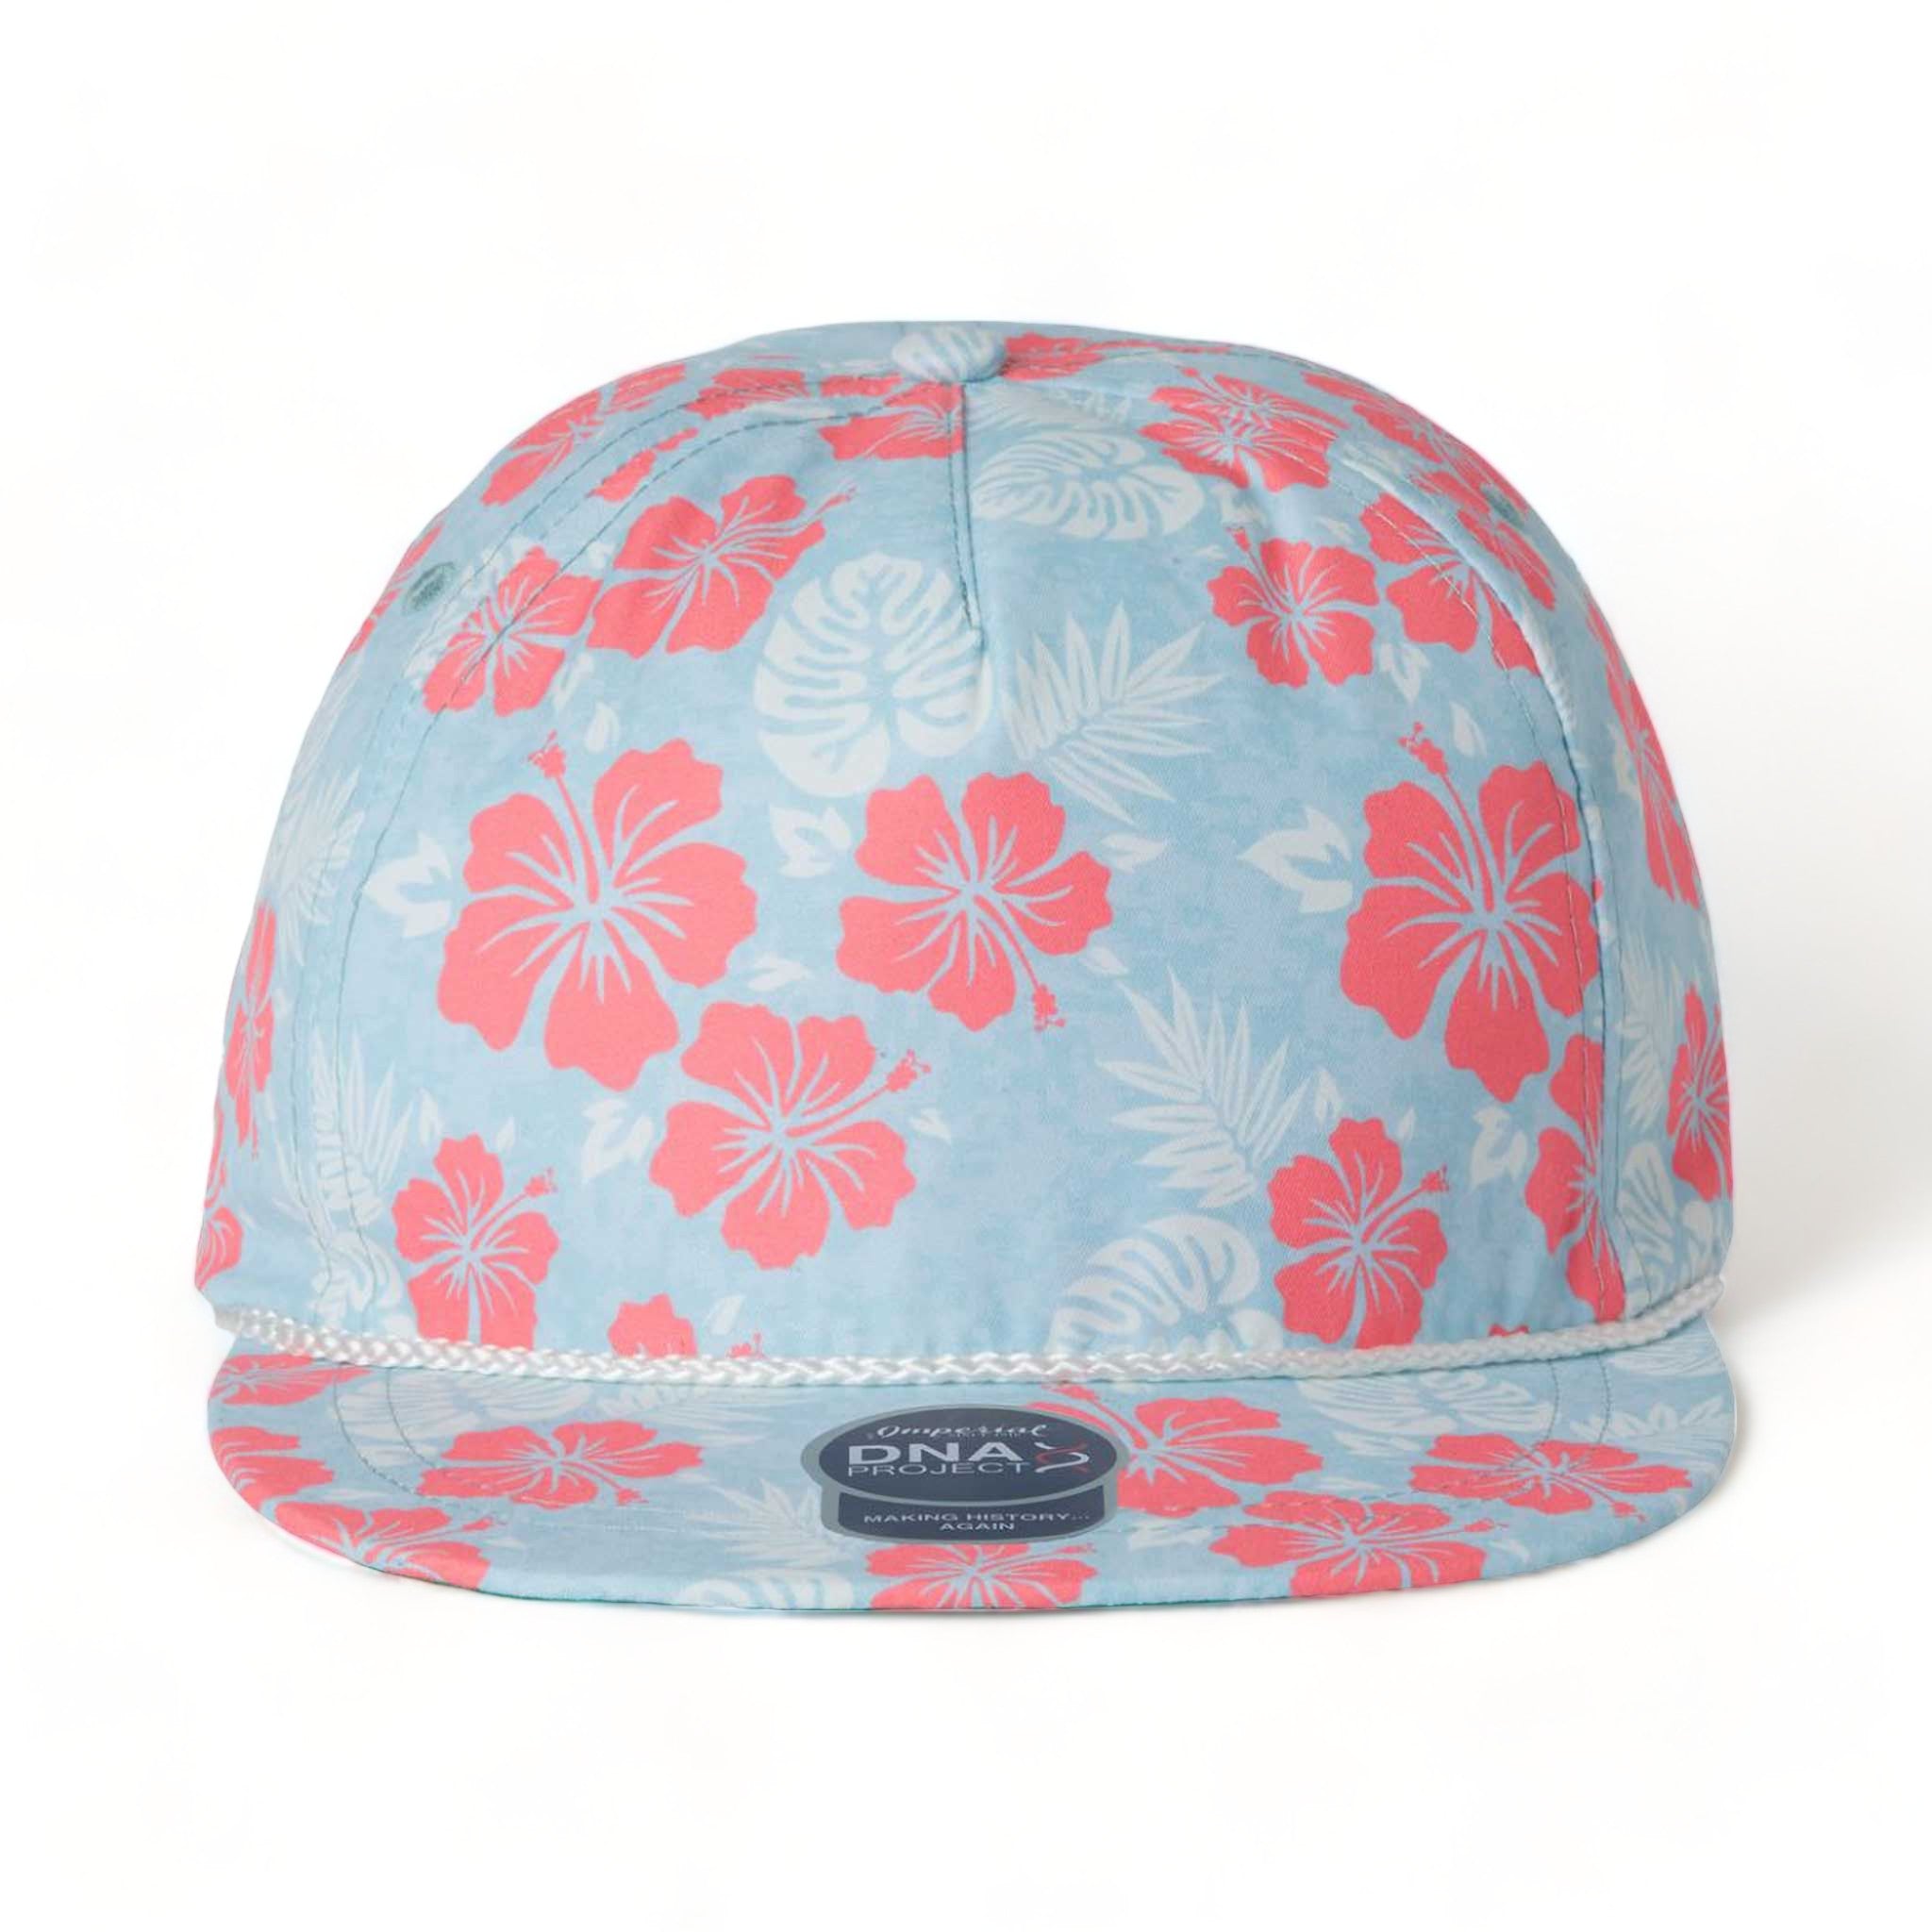 Front view of Imperial DNA010 custom hat in hawai'in sky